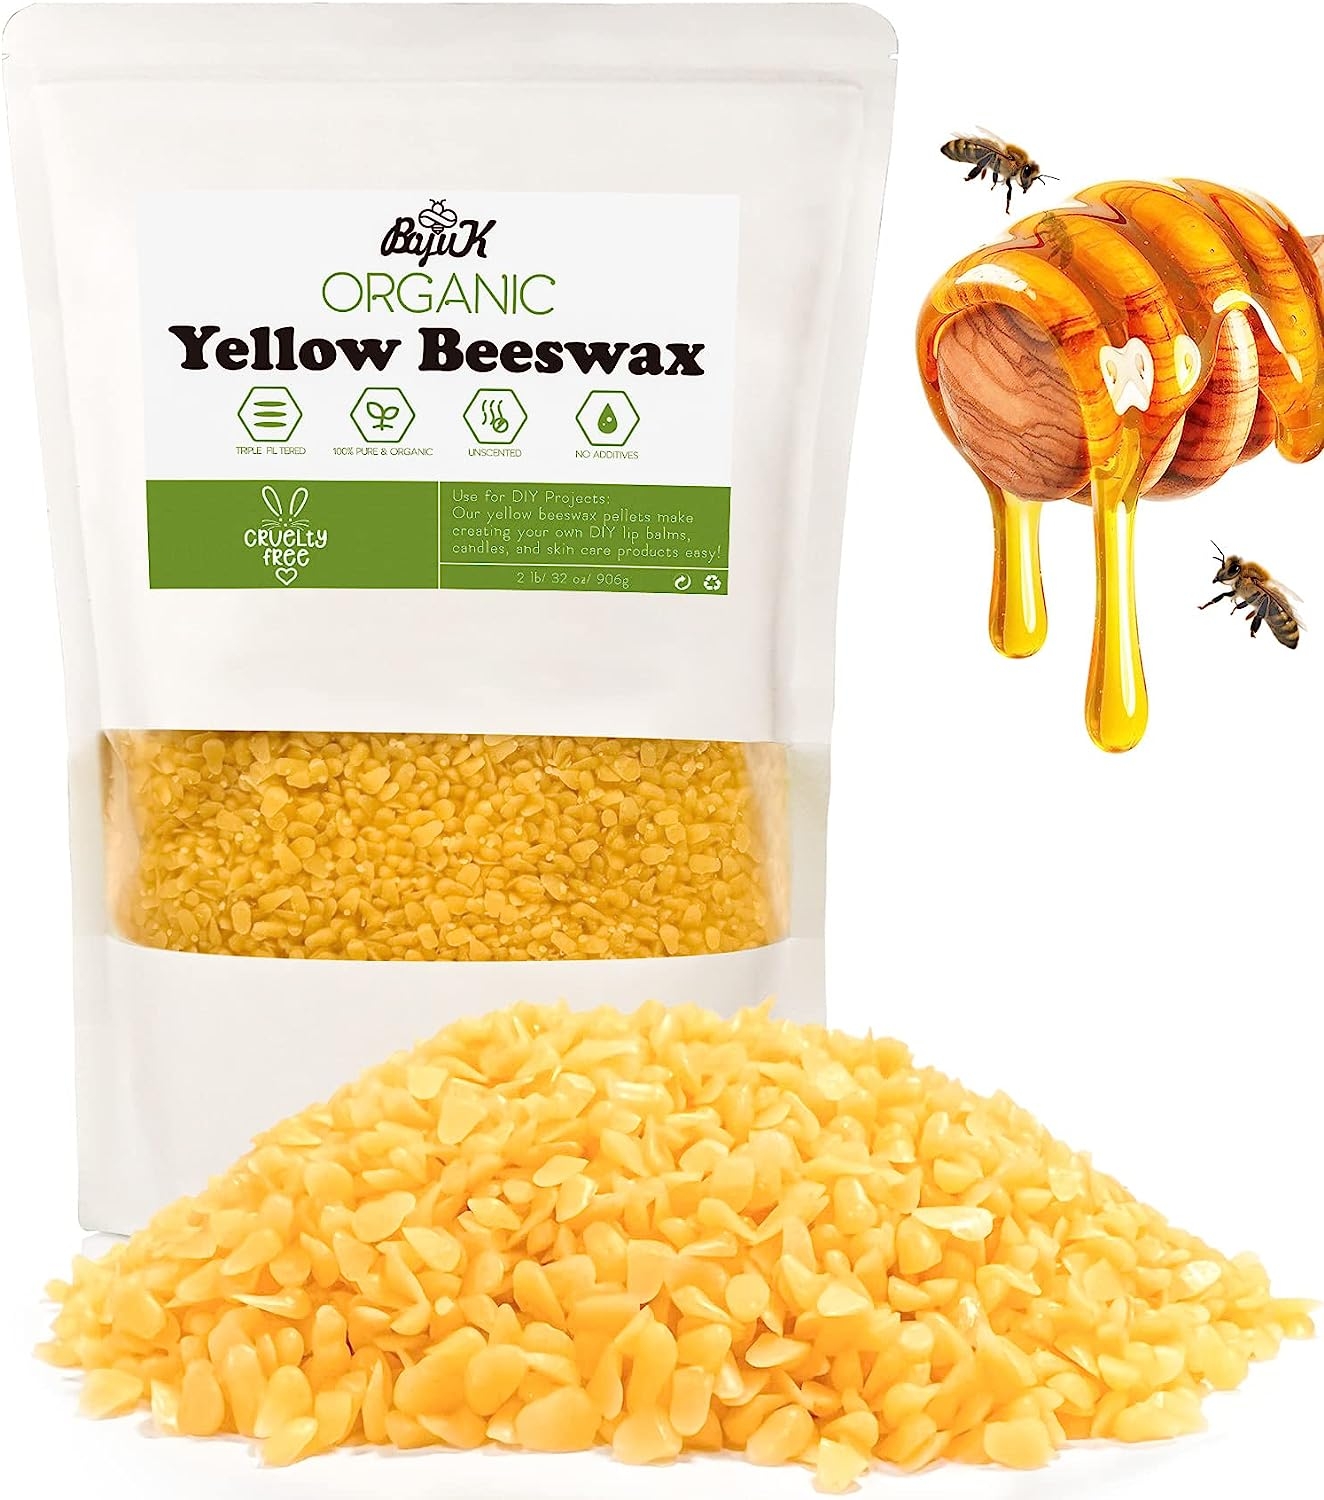 White Beeswax Pellets - 0.5Ib(200g) Beeswax for Candle Making - Beeswax  Pellets Cosmetic Grade Eco Friendly Products - Organic - The Bee Broker